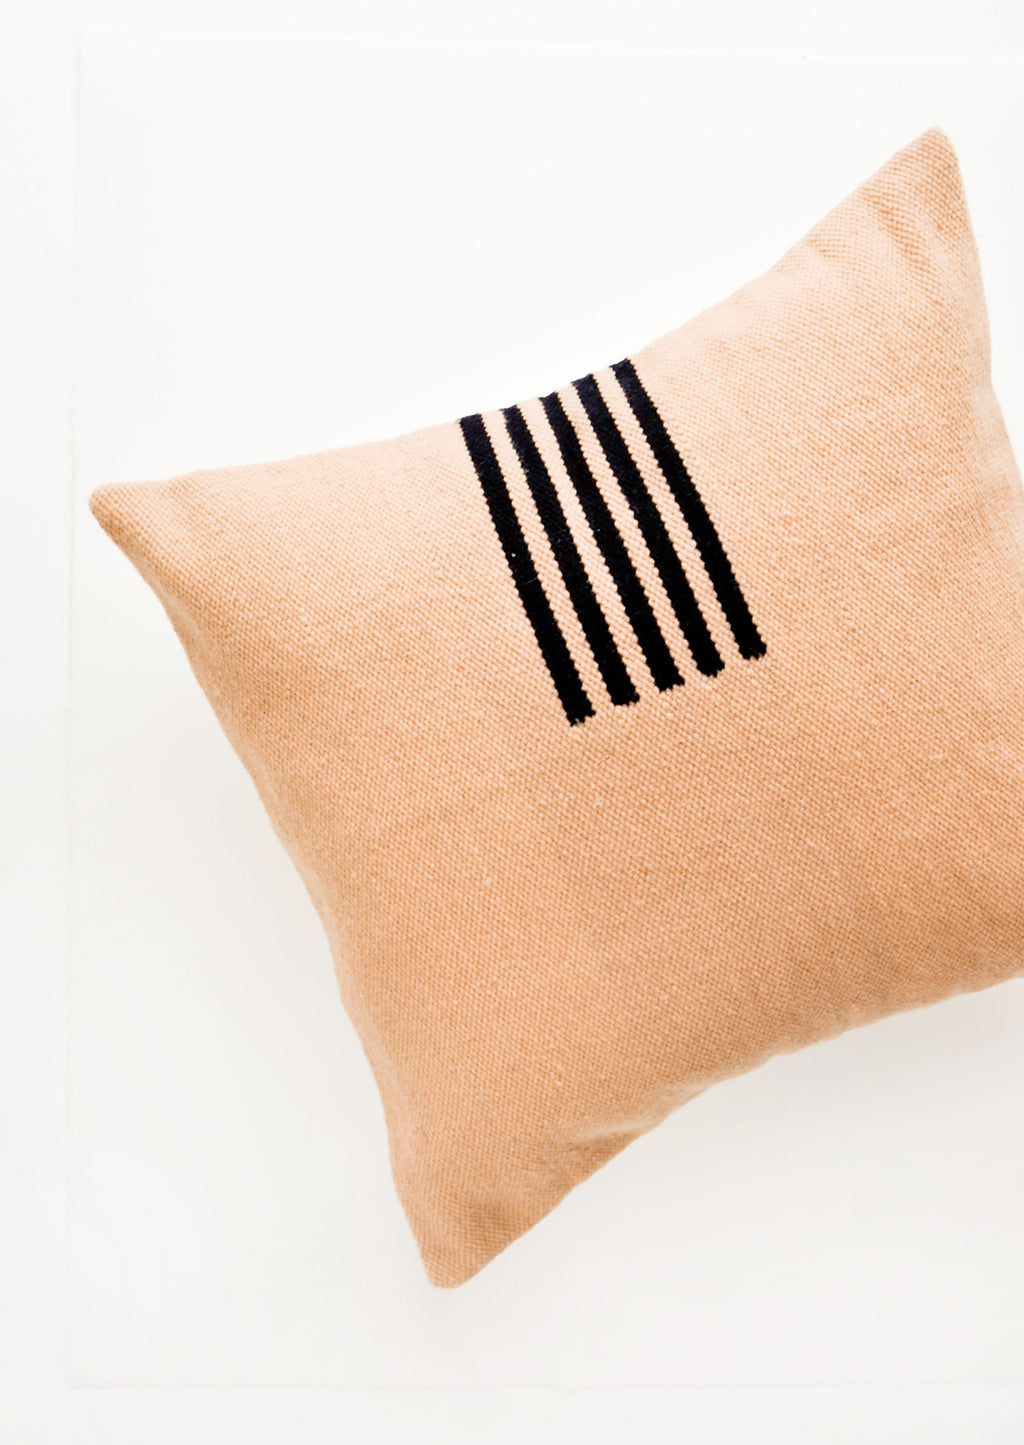 Peach / Navy: Peach colored, square wool throw pillow with contrasting small stripe detail at side.